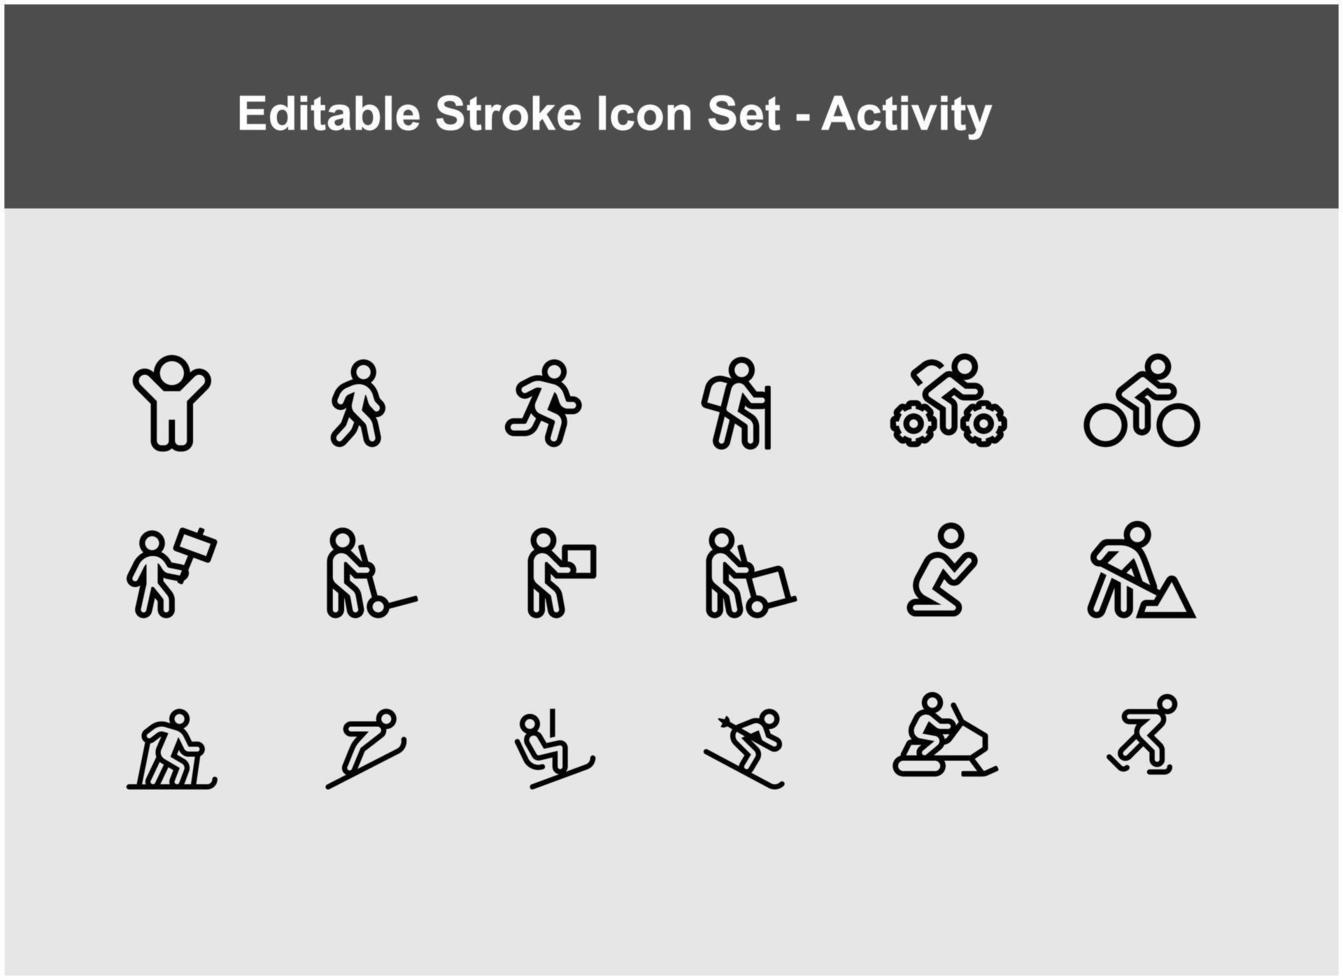 thin icon showing activity vector